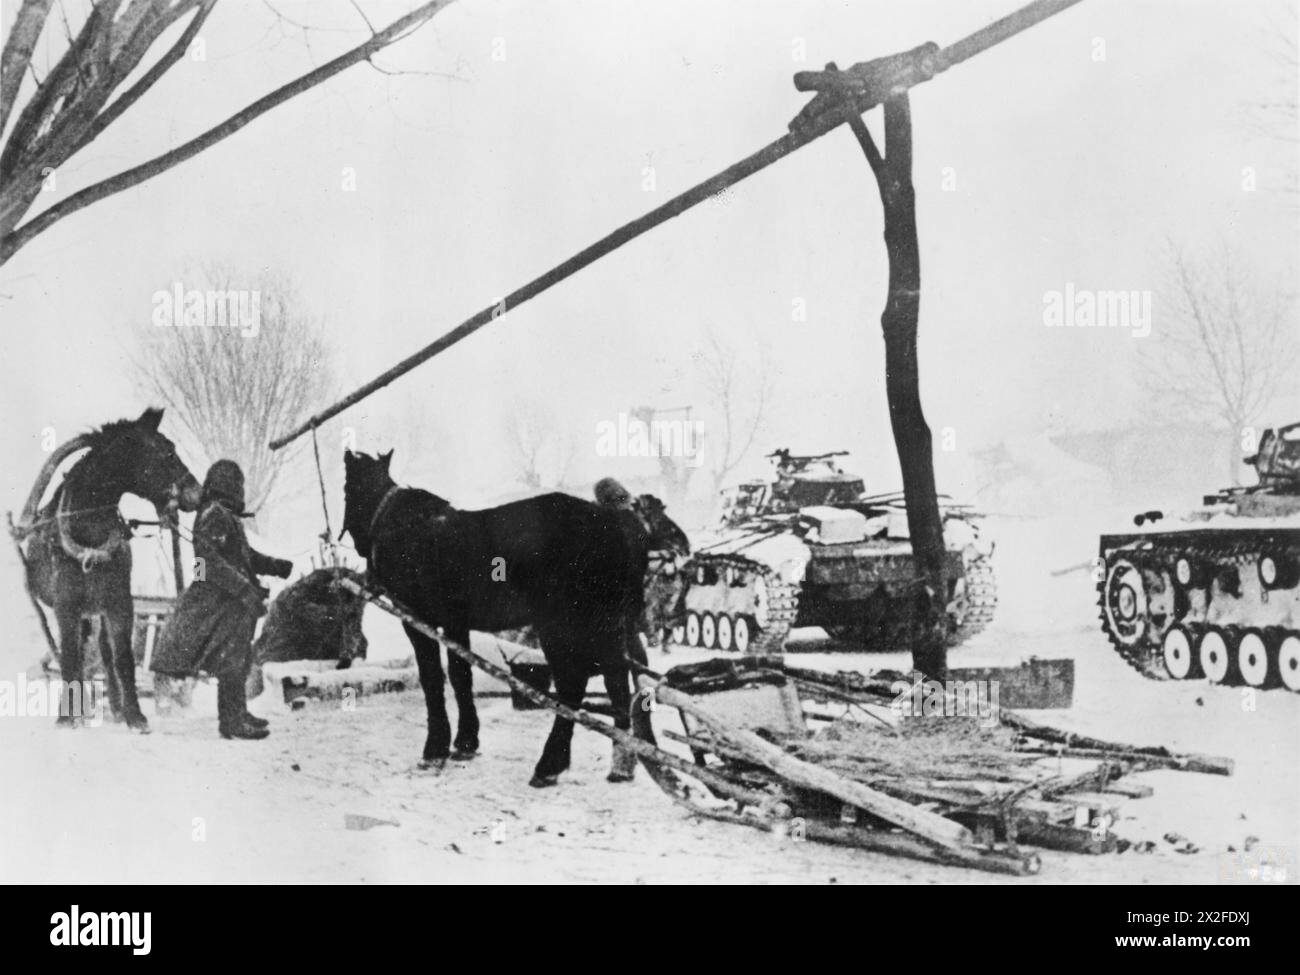 THE GERMAN ARMY ON THE EASTERN FRONT, 1941-1945 - German soldiers have to get water for cooking and washing from frozen springs. Panzer III tanks stand by in deep snow in an area east of Kursk, 1-10 March 1942 German Army Stock Photo